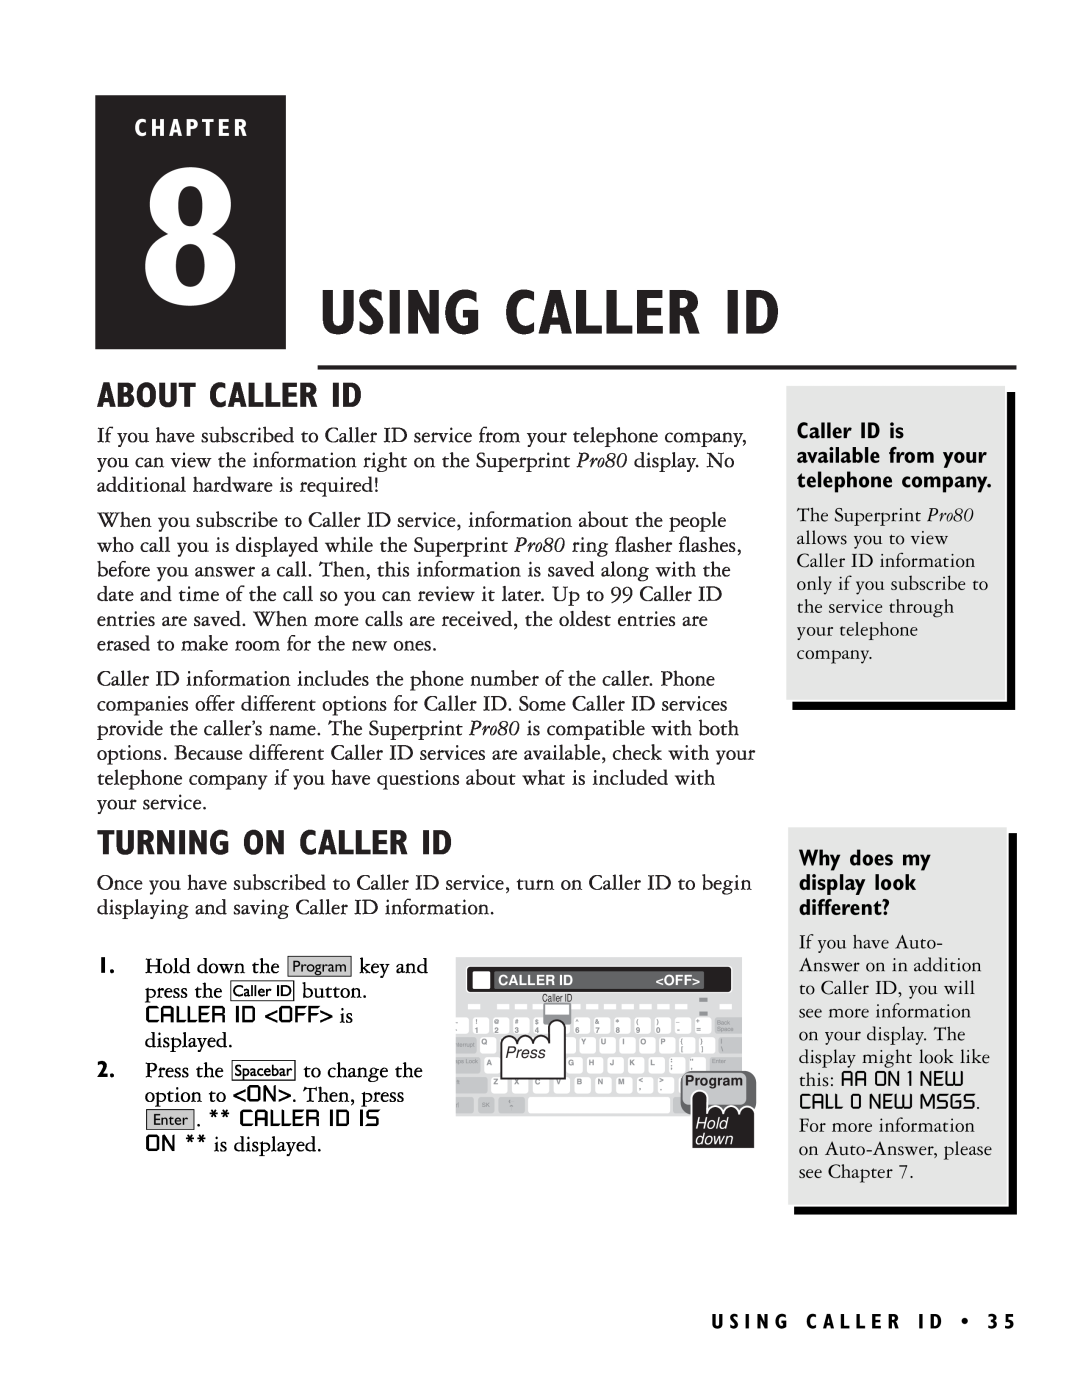 Ultratec PRO80TM manual Using Caller Id, About Caller Id, Turning On Caller Id, C H A P T E R 